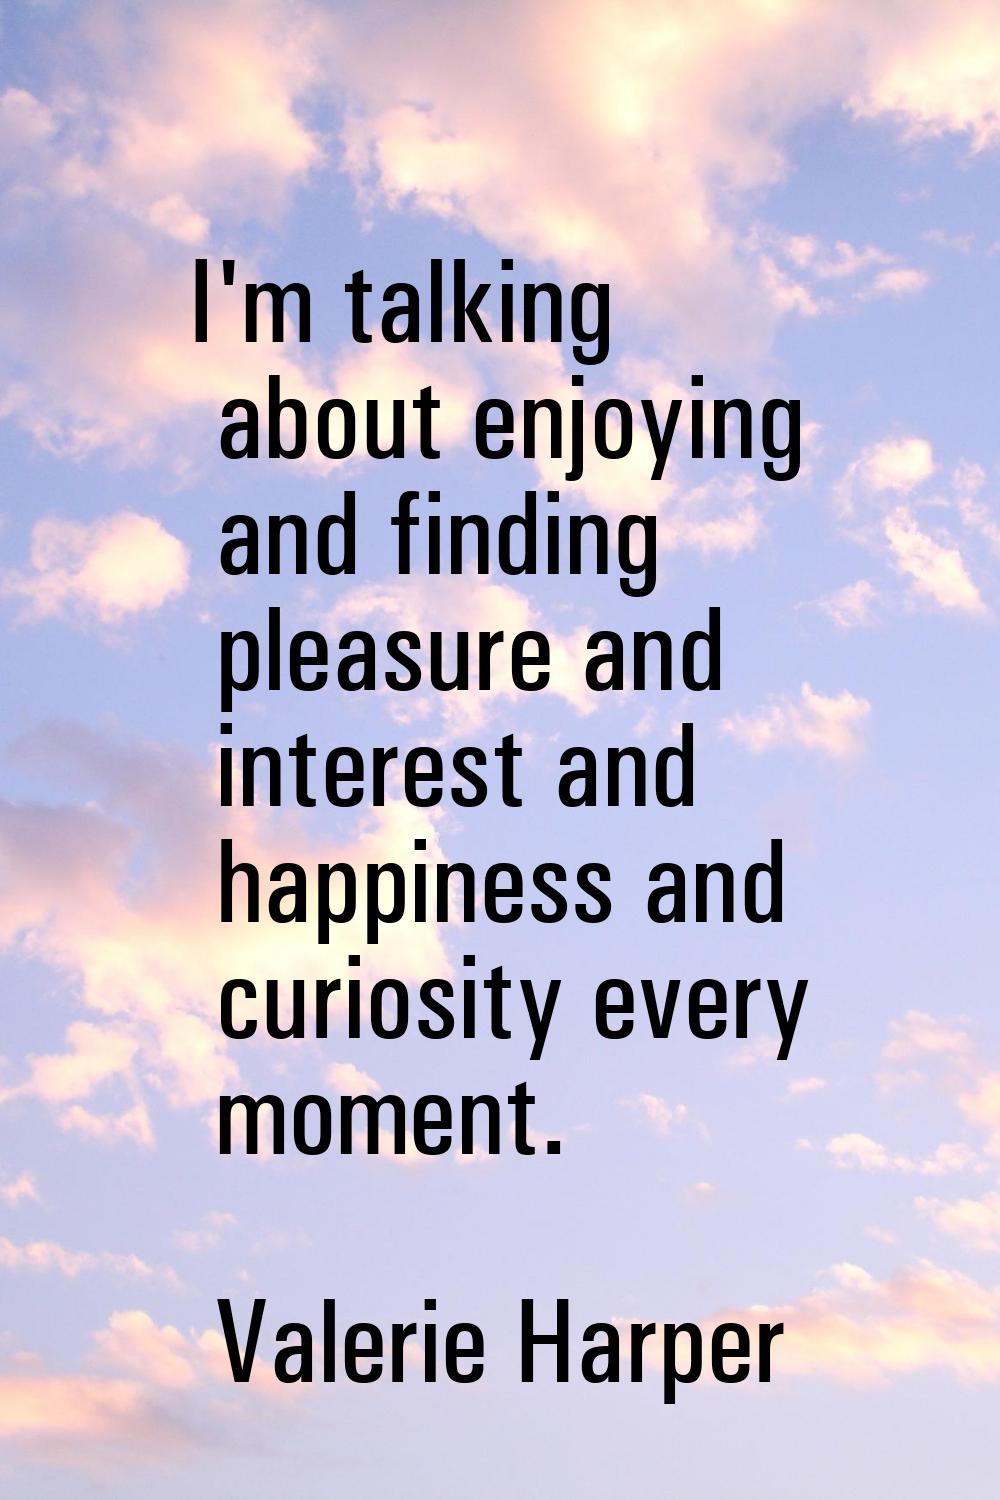 I'm talking about enjoying and finding pleasure and interest and happiness and curiosity every mome